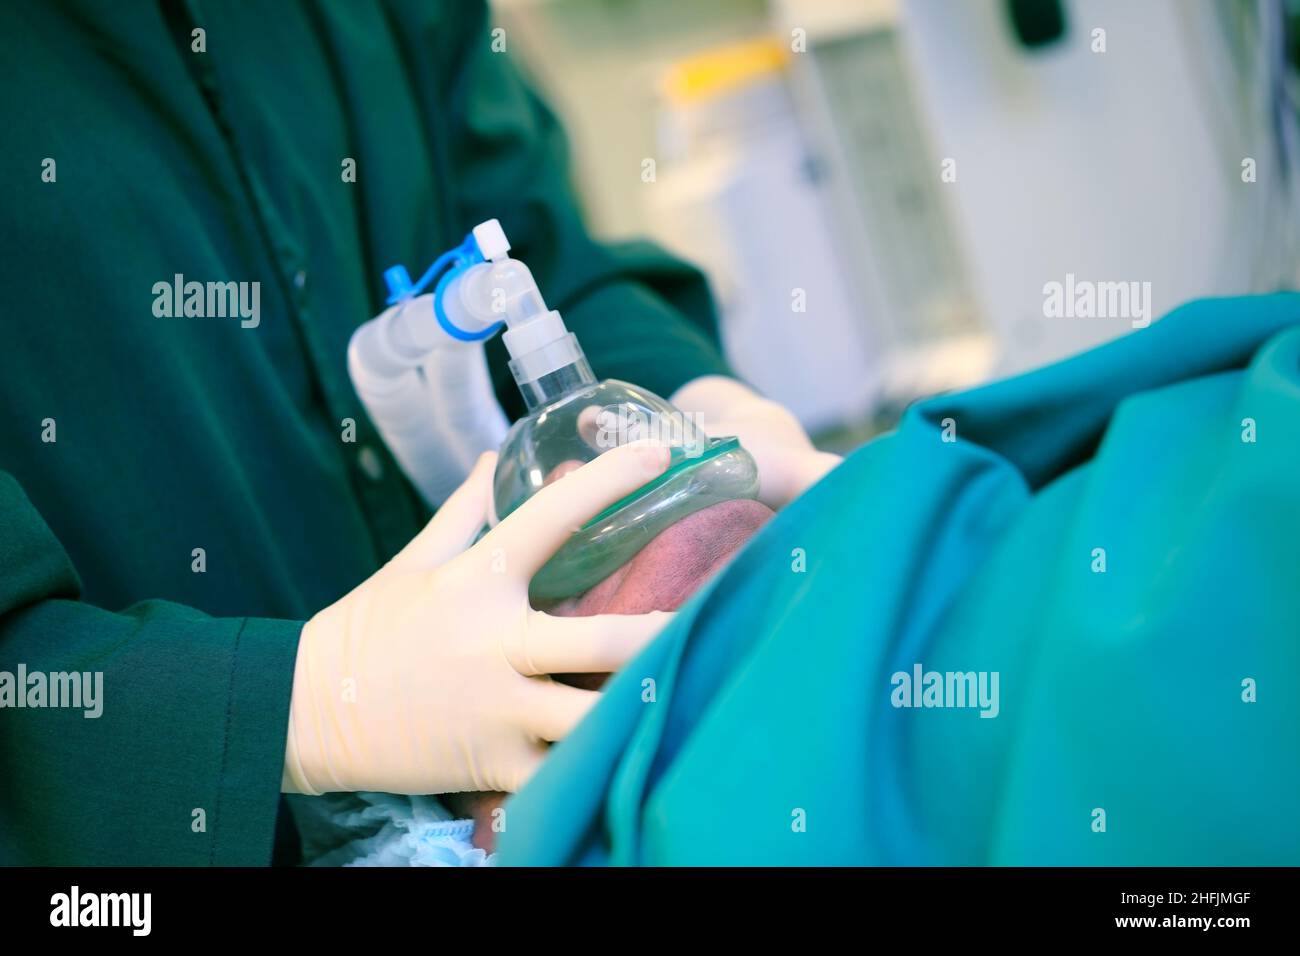 Doctor presses the artificial respiratory mask to the patient's face, concept of an anesthesiologist's work. Stock Photo